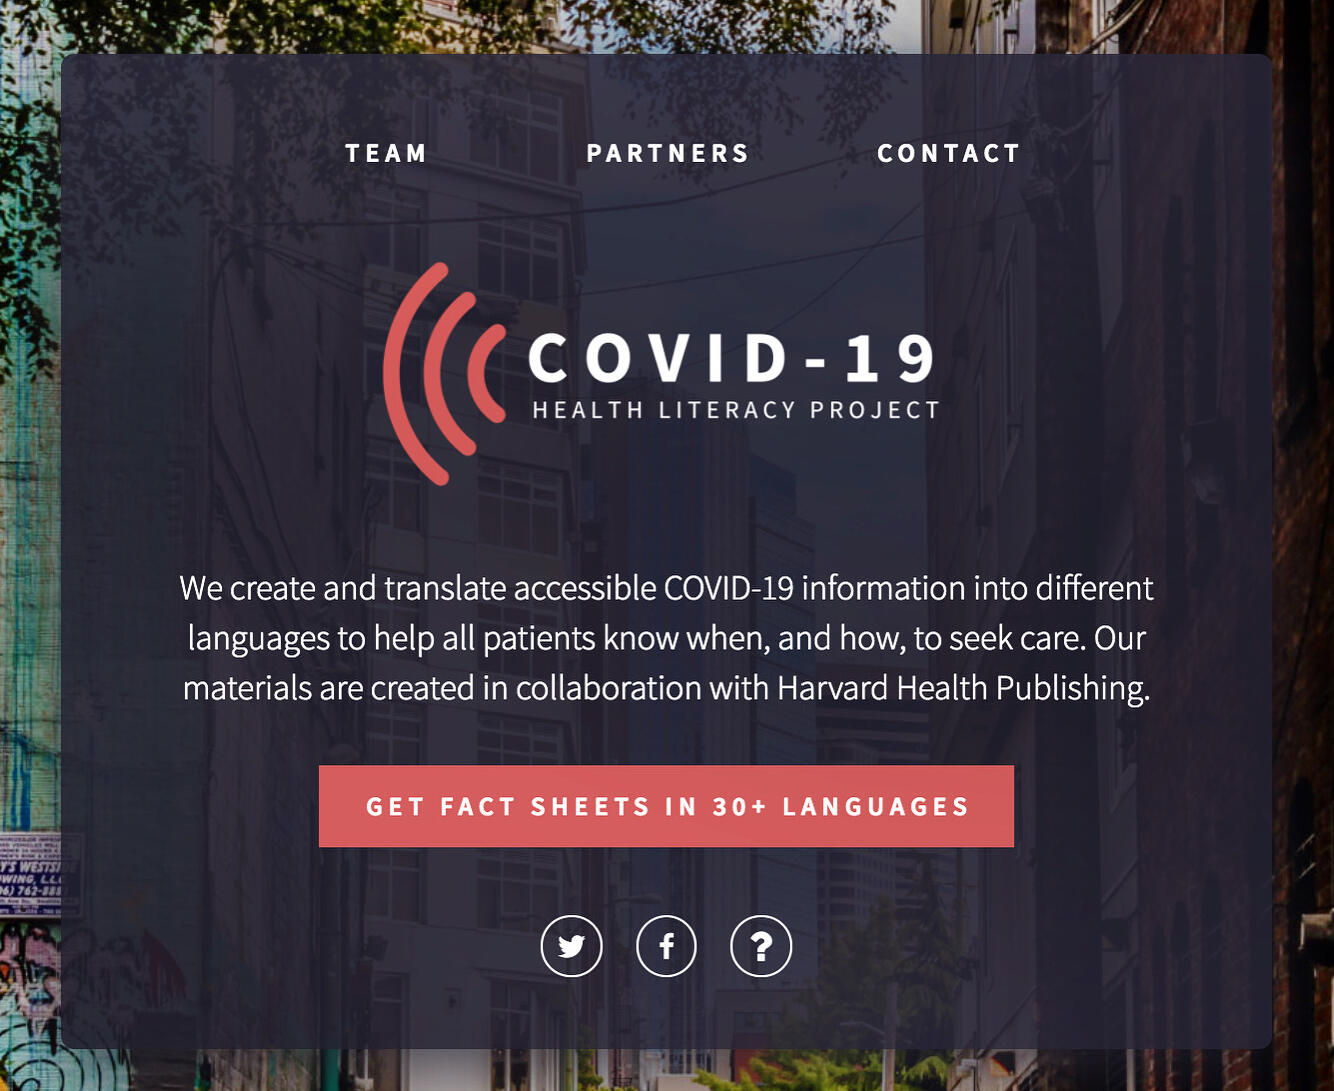 Laura Pesquera, DMD23, provided Spanish translations for the COVID-19 Health Literacy Project, which aimed to provide guidance on COVID-19 in more than 35 languages.